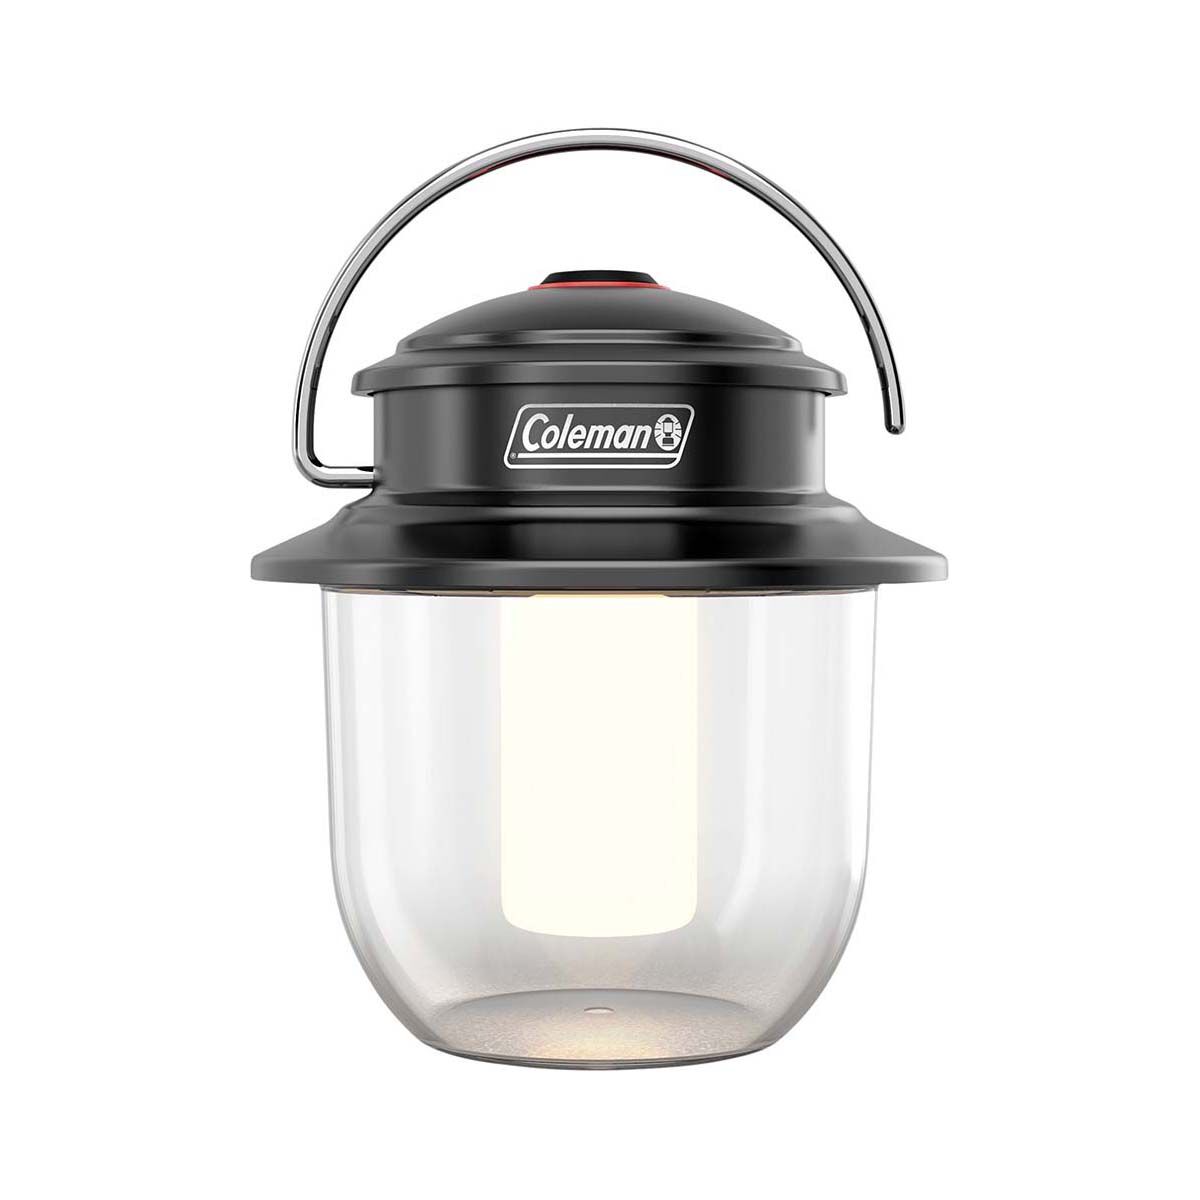 Why You Need a Classic Coleman Lantern at the Campground